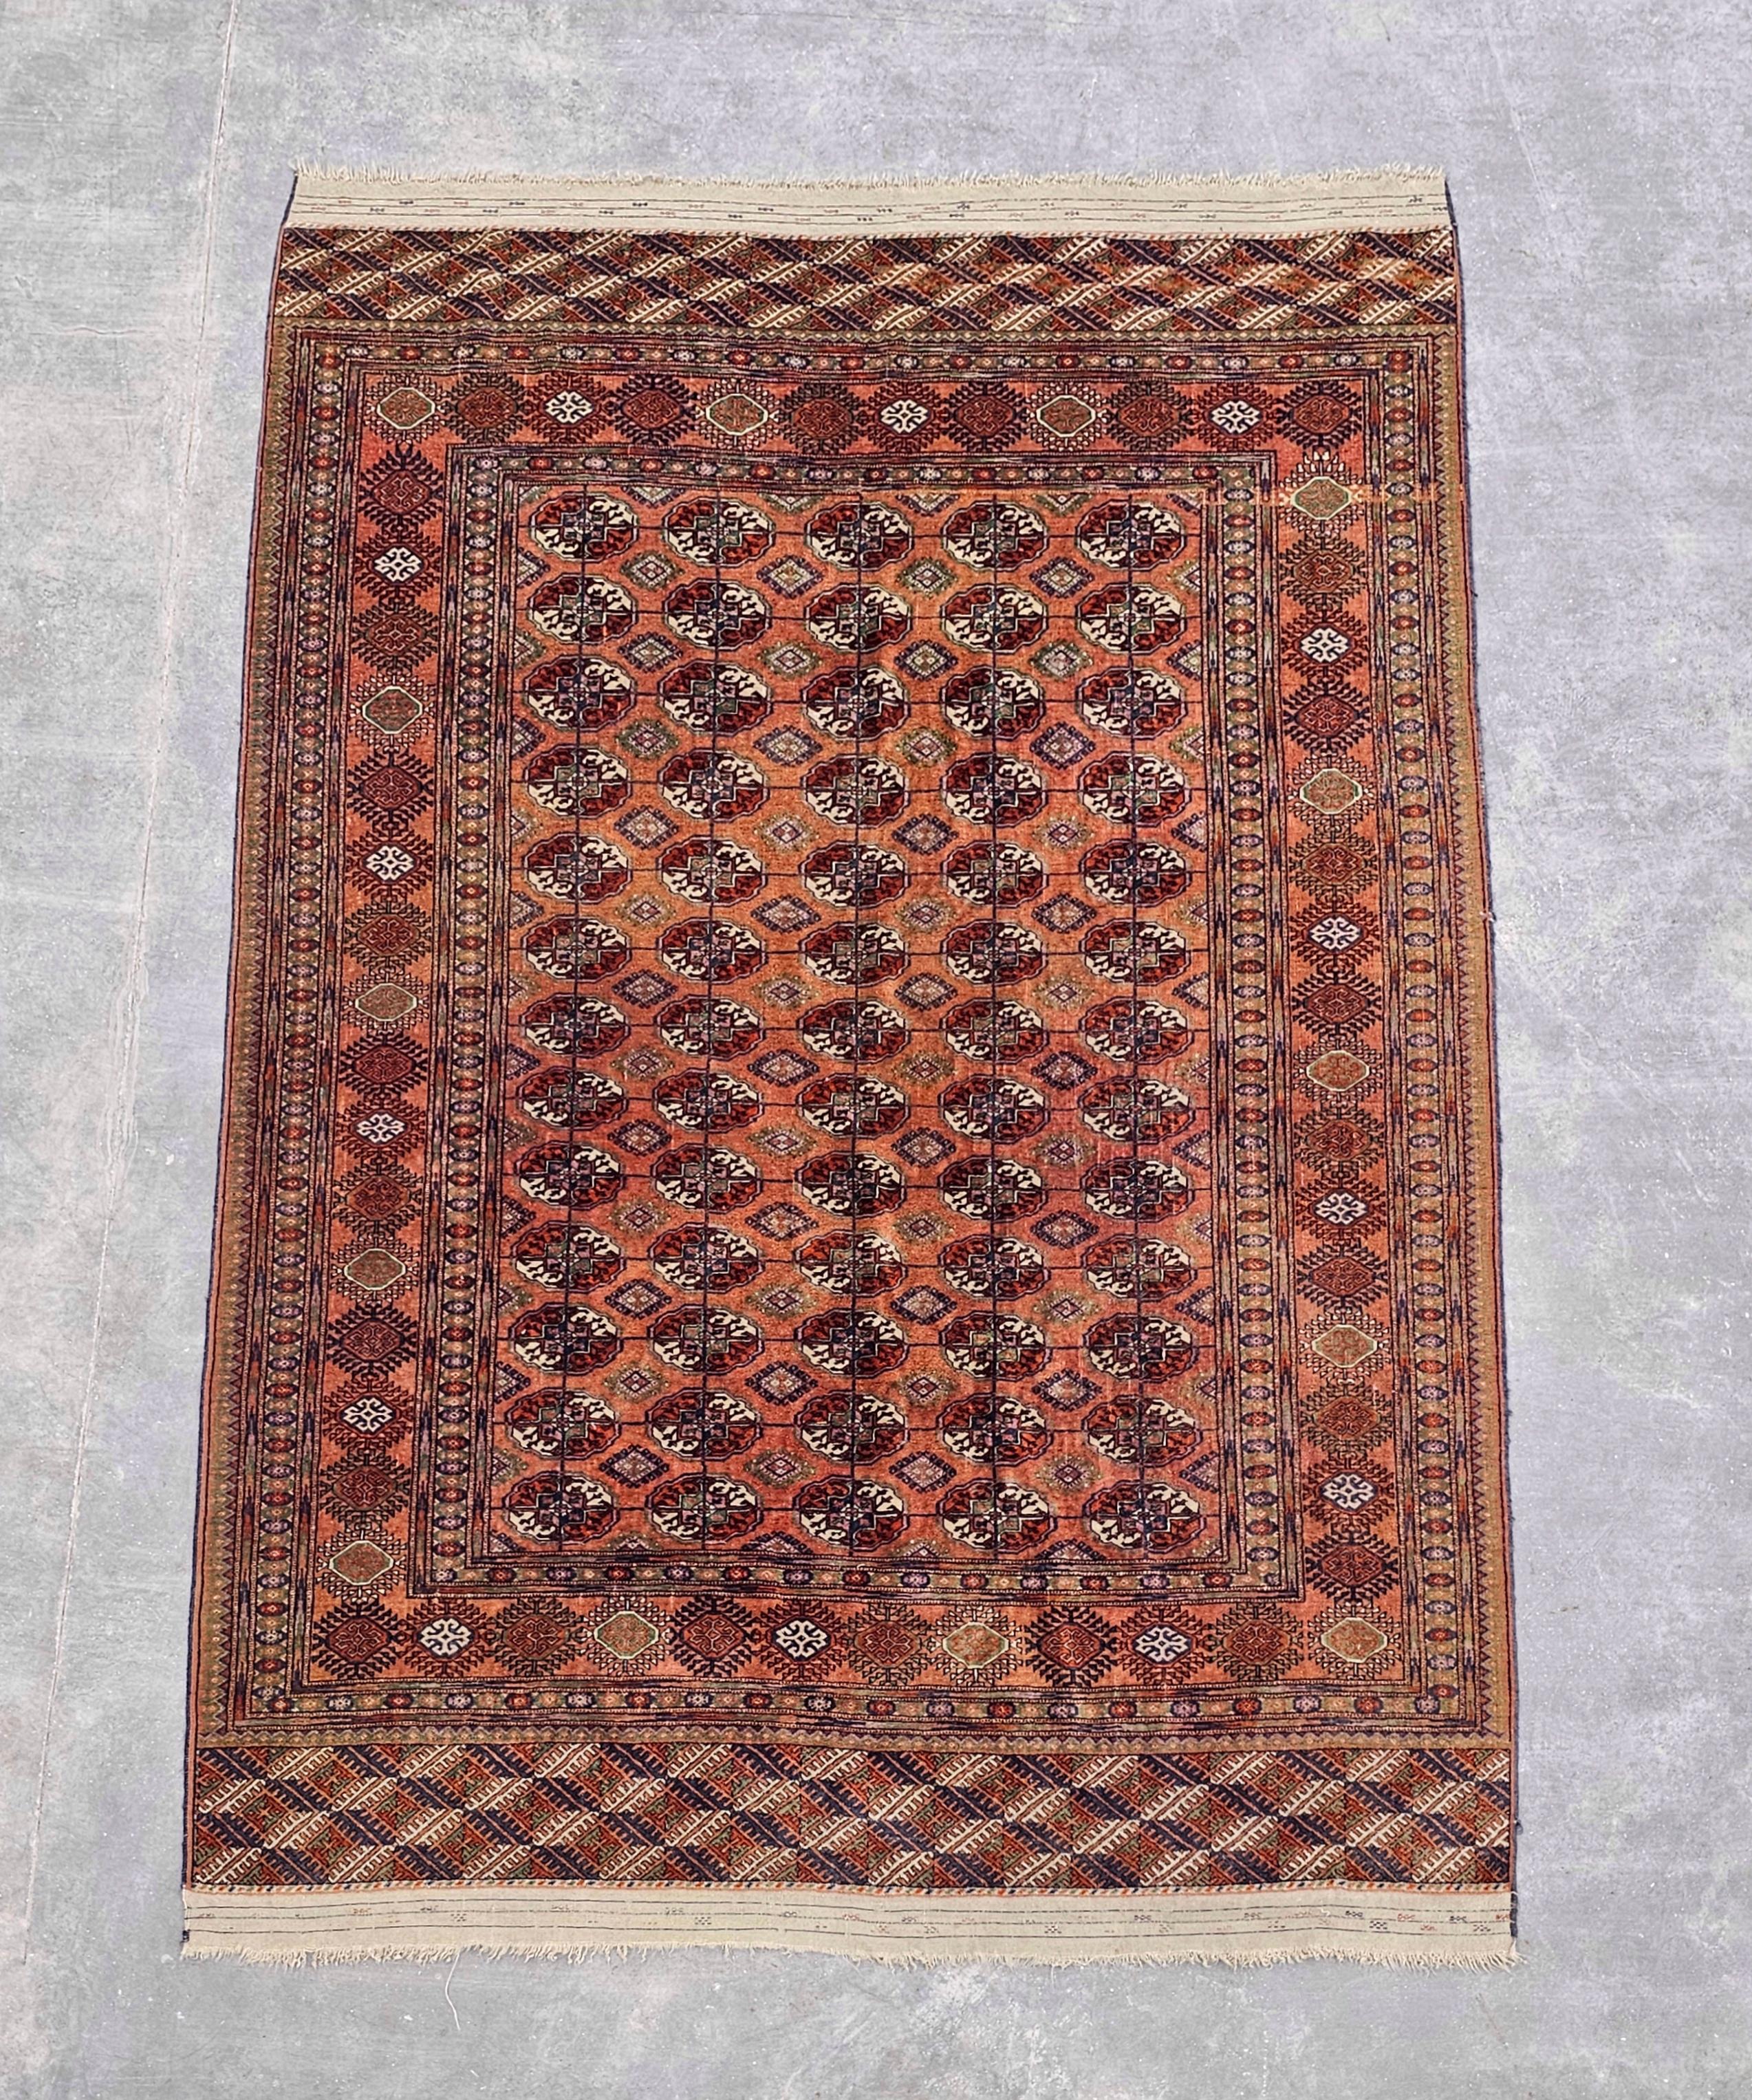 Early 20th Century Antique Hand-knotted Turkmen Bokhara Rug in brick orange/red, Turkmenistan 1920s